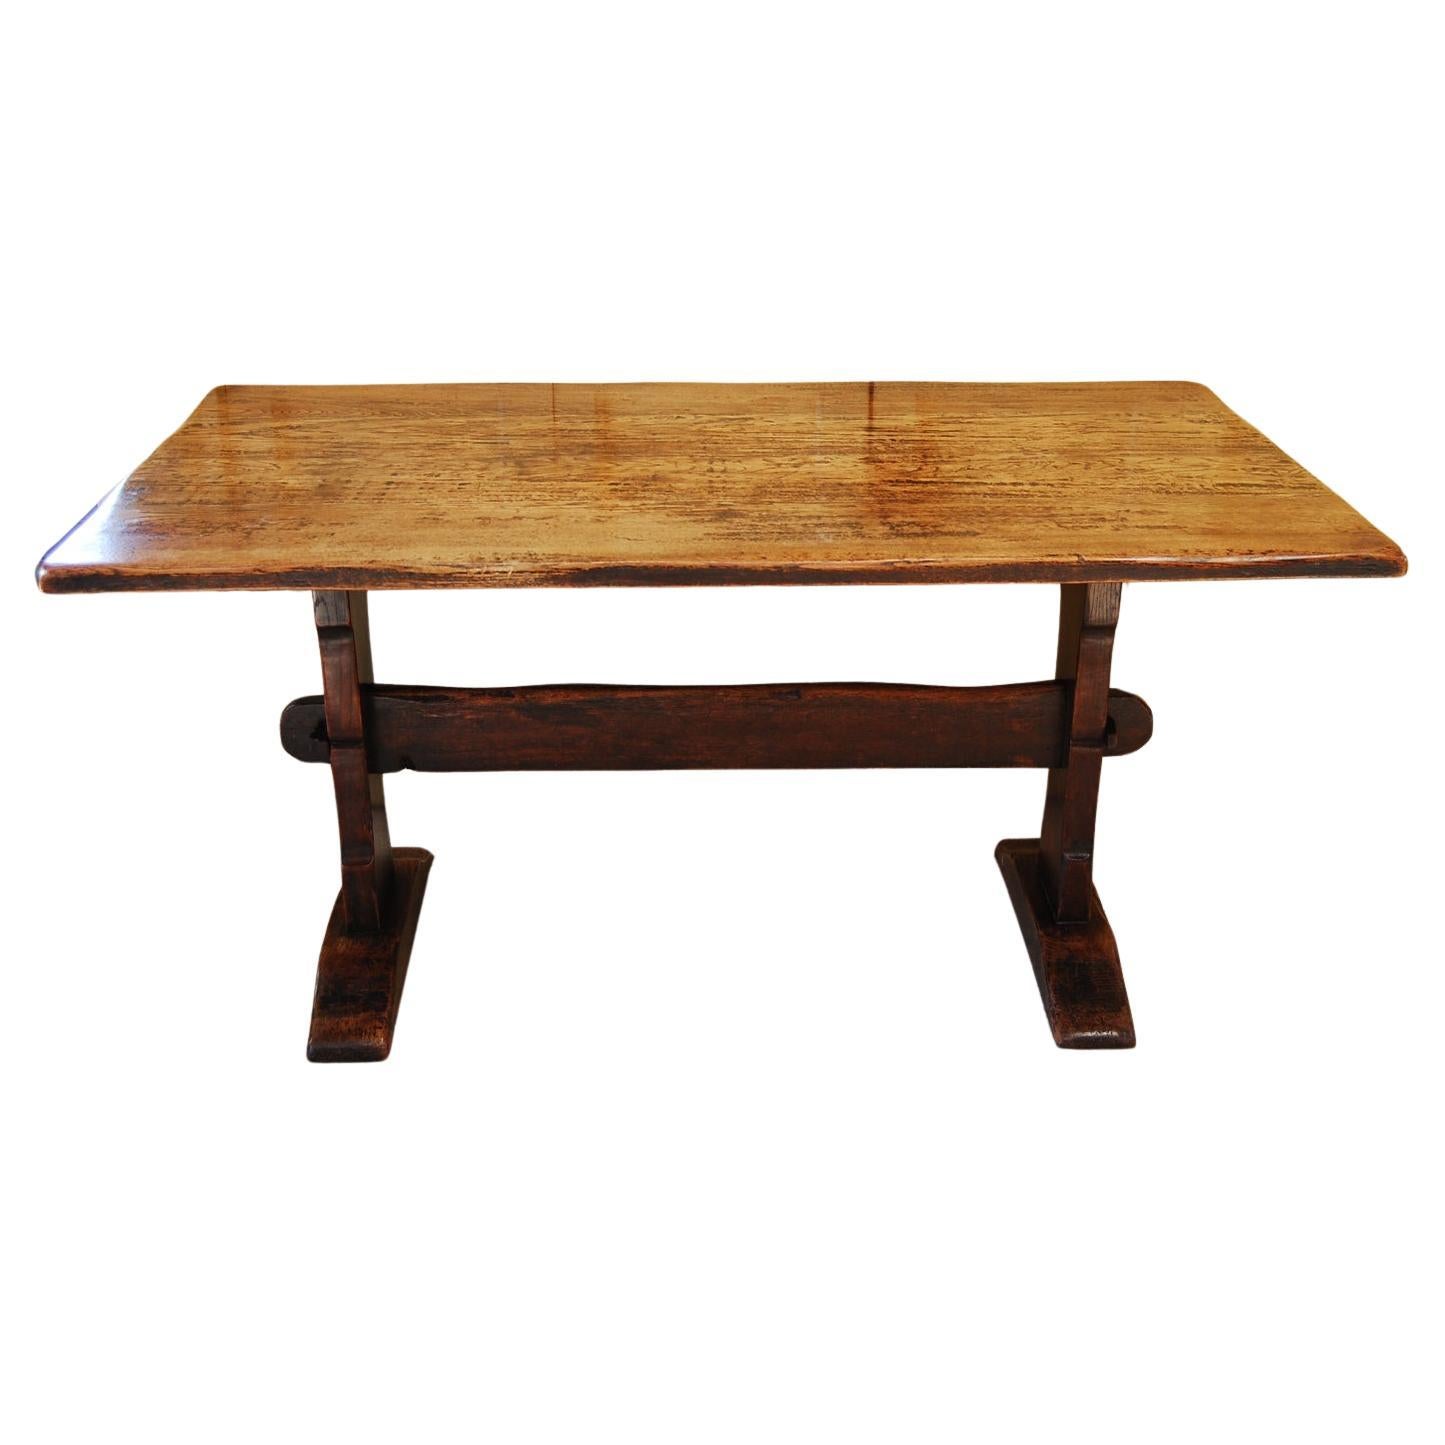 English Arts and Crafts Oak Farmhouse Table with Trestle Base and Plank Top